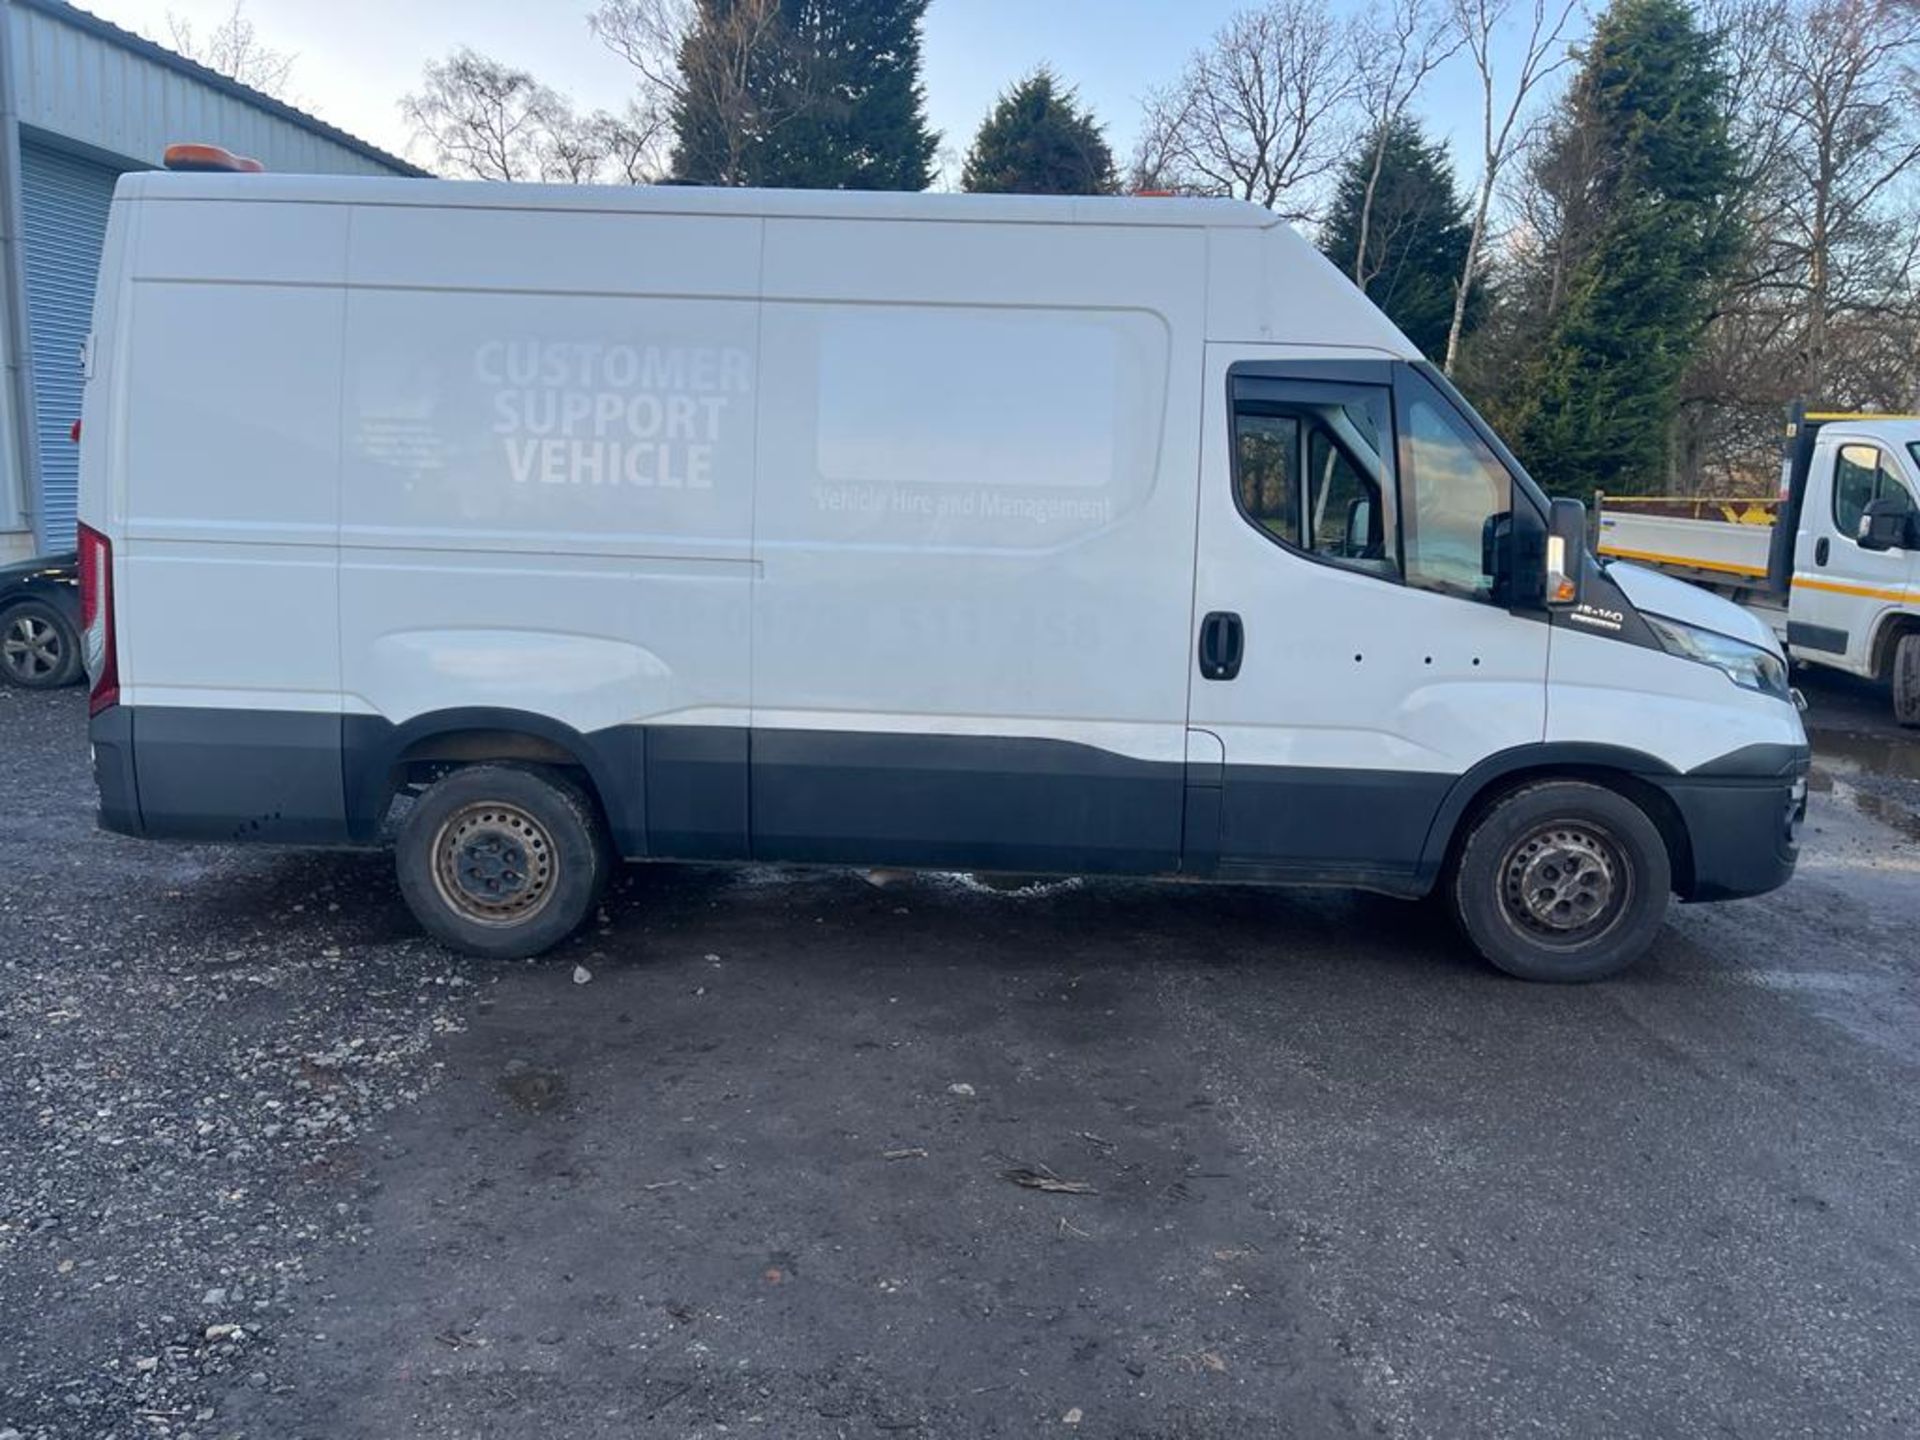 2017 Iveco daily mwb workshop van - Pto driven arc welder and 110v plug and 12v and 24v jump point - Image 8 of 11